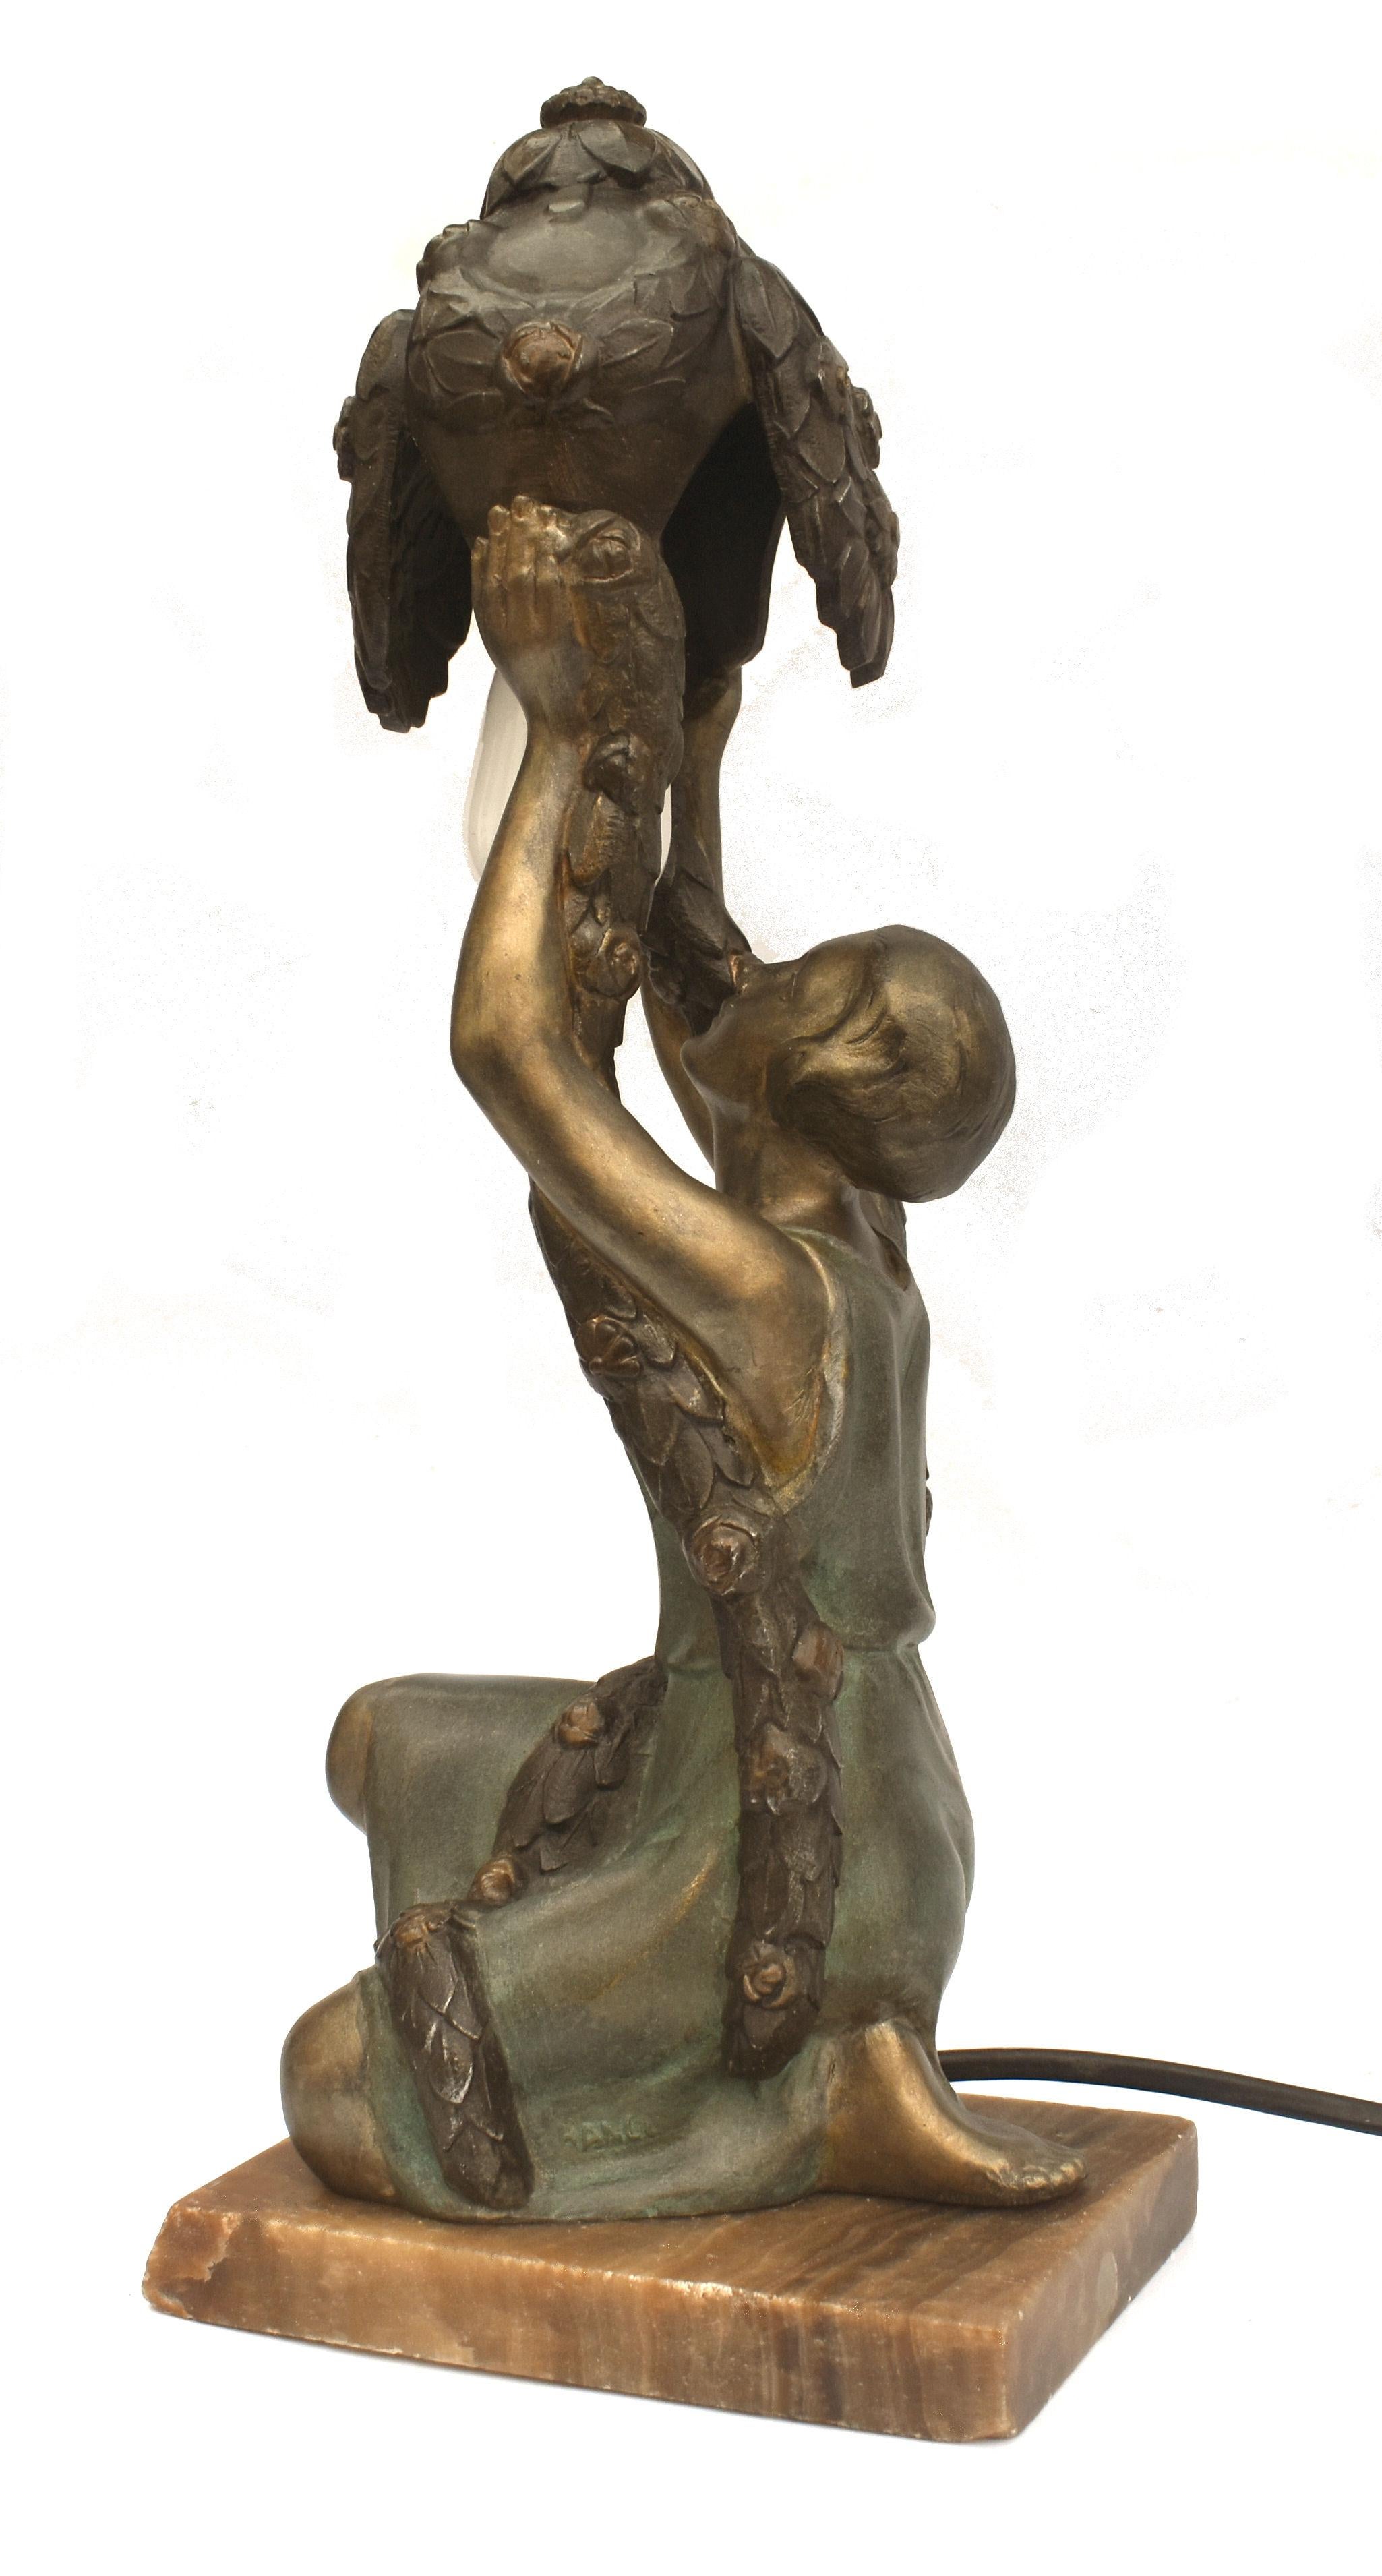 An impressive 34 cm tall this original 1930's Art Deco cold painted spelter table lamp is P. Sega , France and features a young lady holding aloft a foliage. Kneeling on an onyx base she is in beautiful condition with hardly any visible wear to the